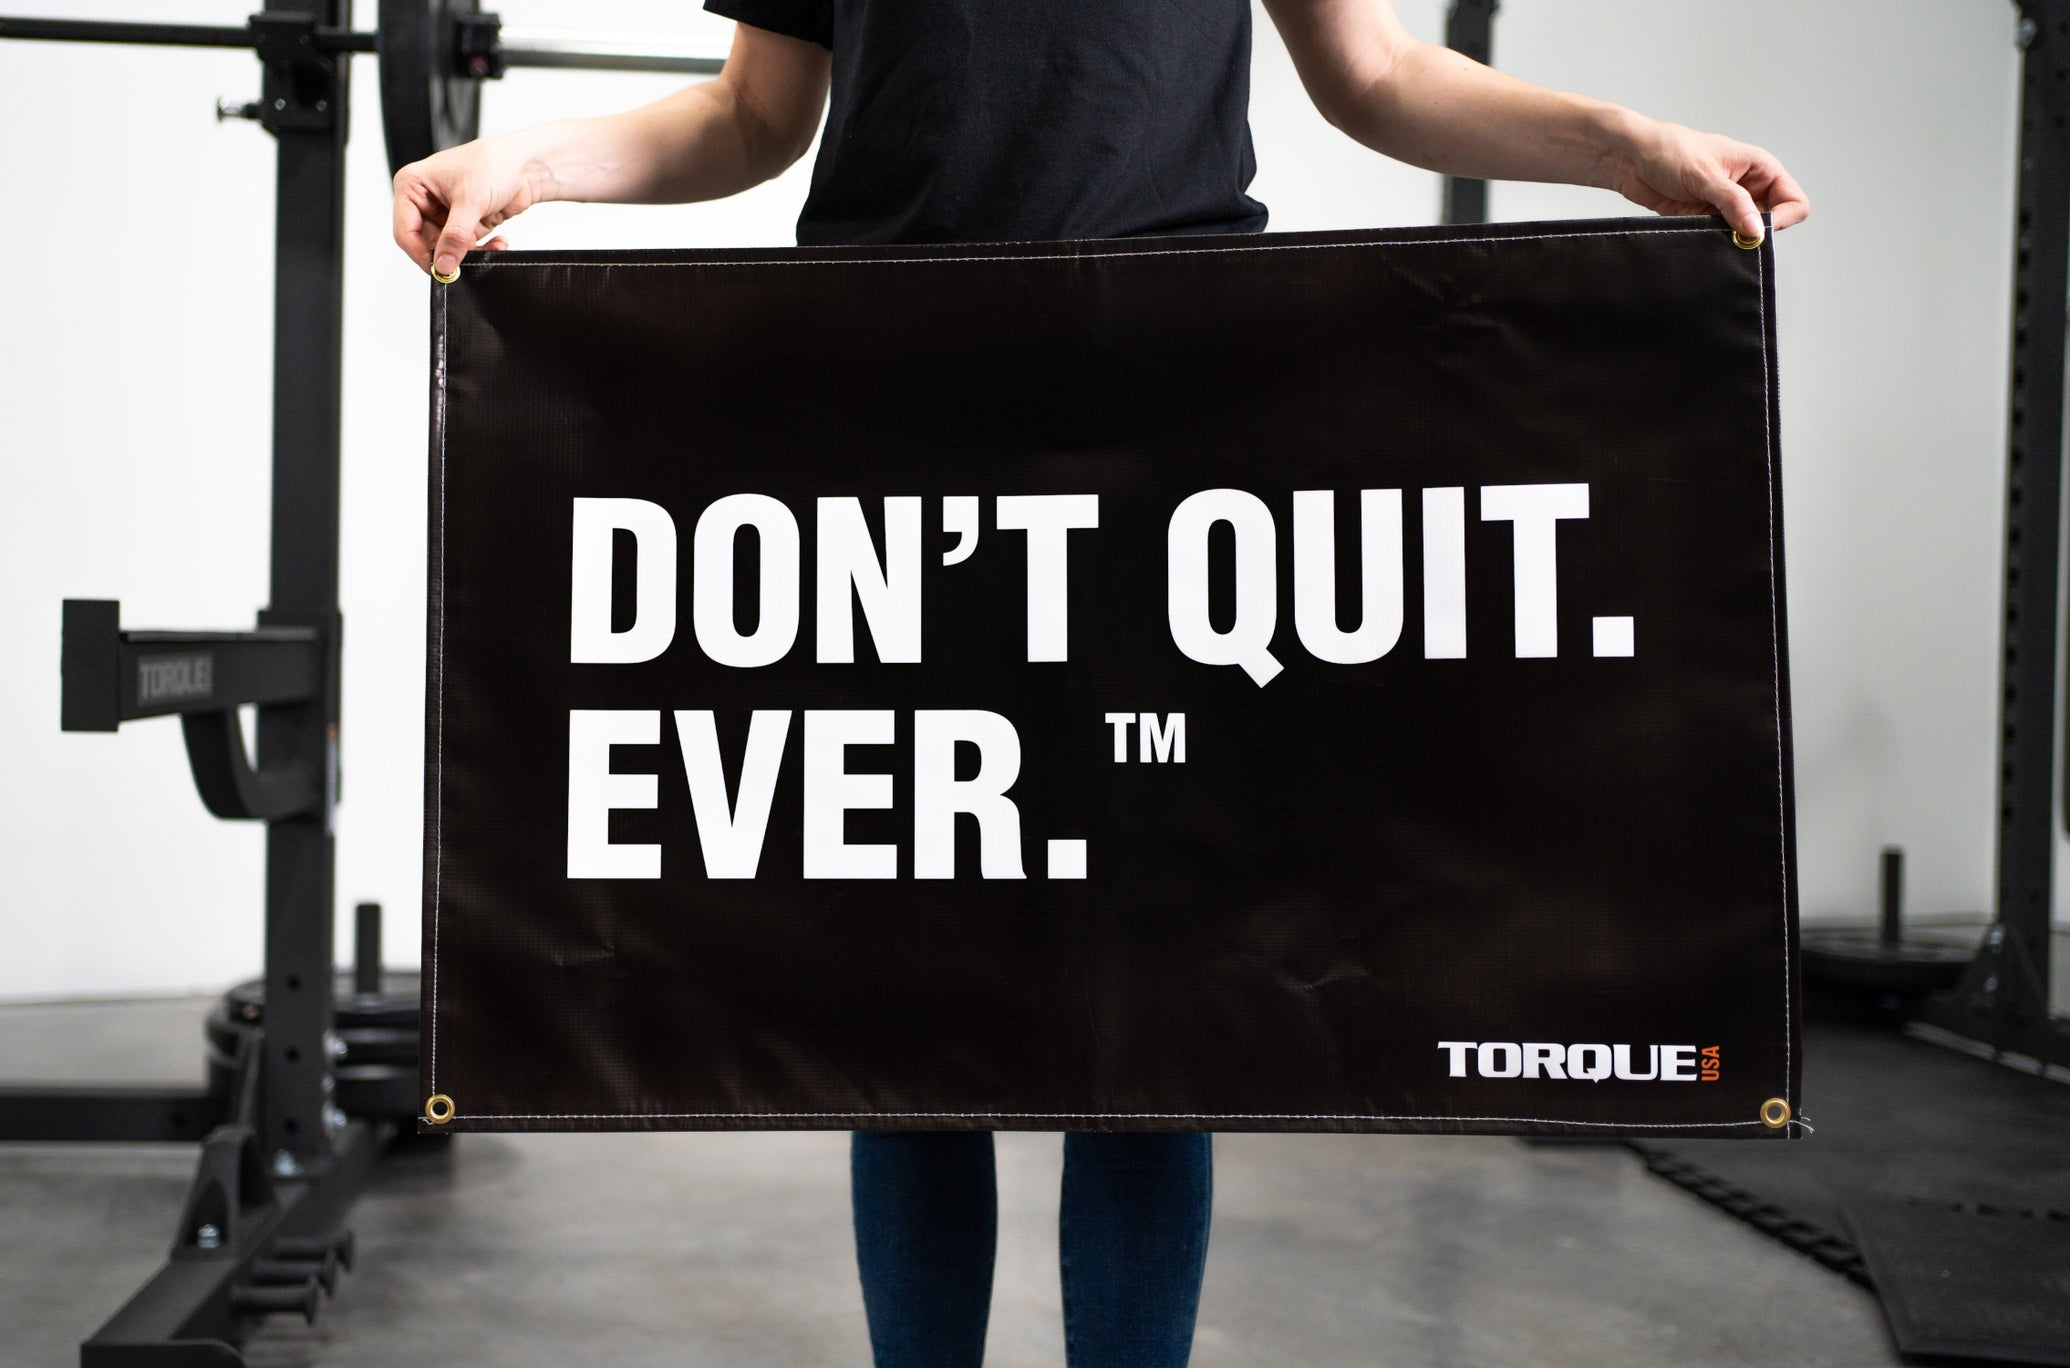 Inspirational Gym Banner For Home or Garage Gym Training Don't Quit Ever Message